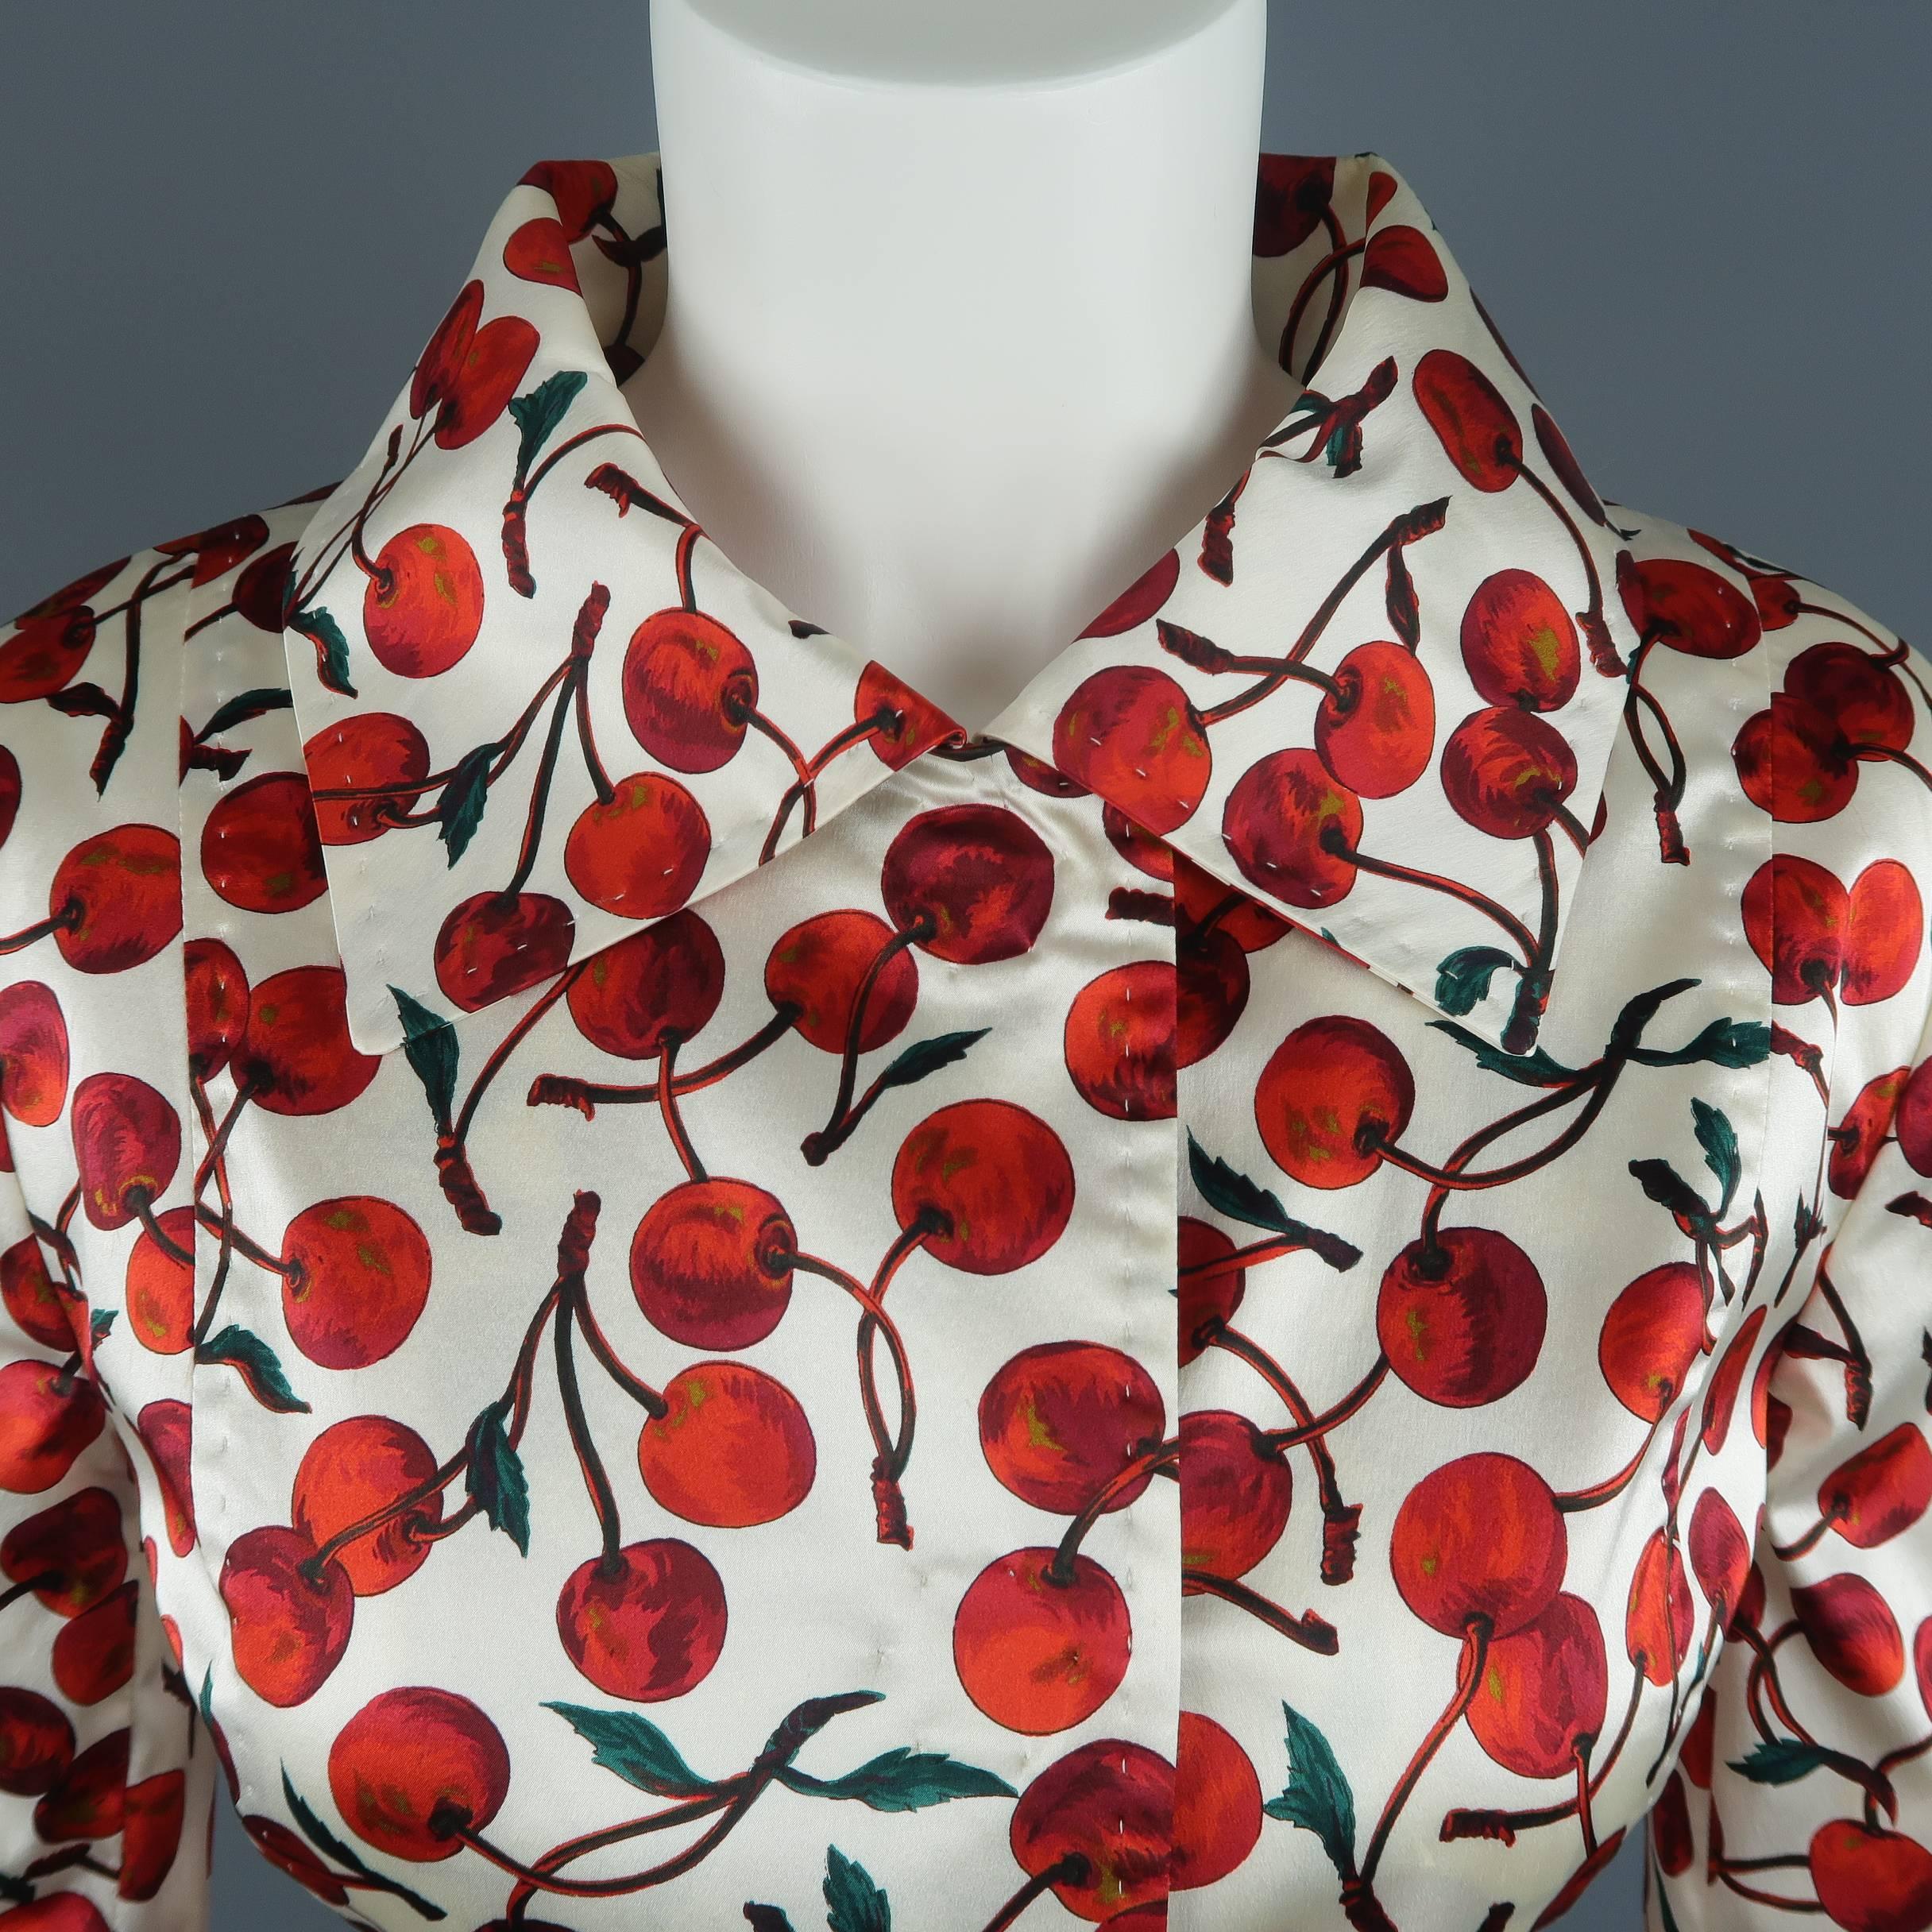 DOLCE & GABBANA jacket comes in cream and red cherry print satin with a pointed collar, cropped sleeves, and hidden placket snap closures. Made in Italy.
 
Excellent Pre-Owned Condition.
Marked: (no size)
 
Measurements:
 
Shoulder: 15 in.
Bust: 36